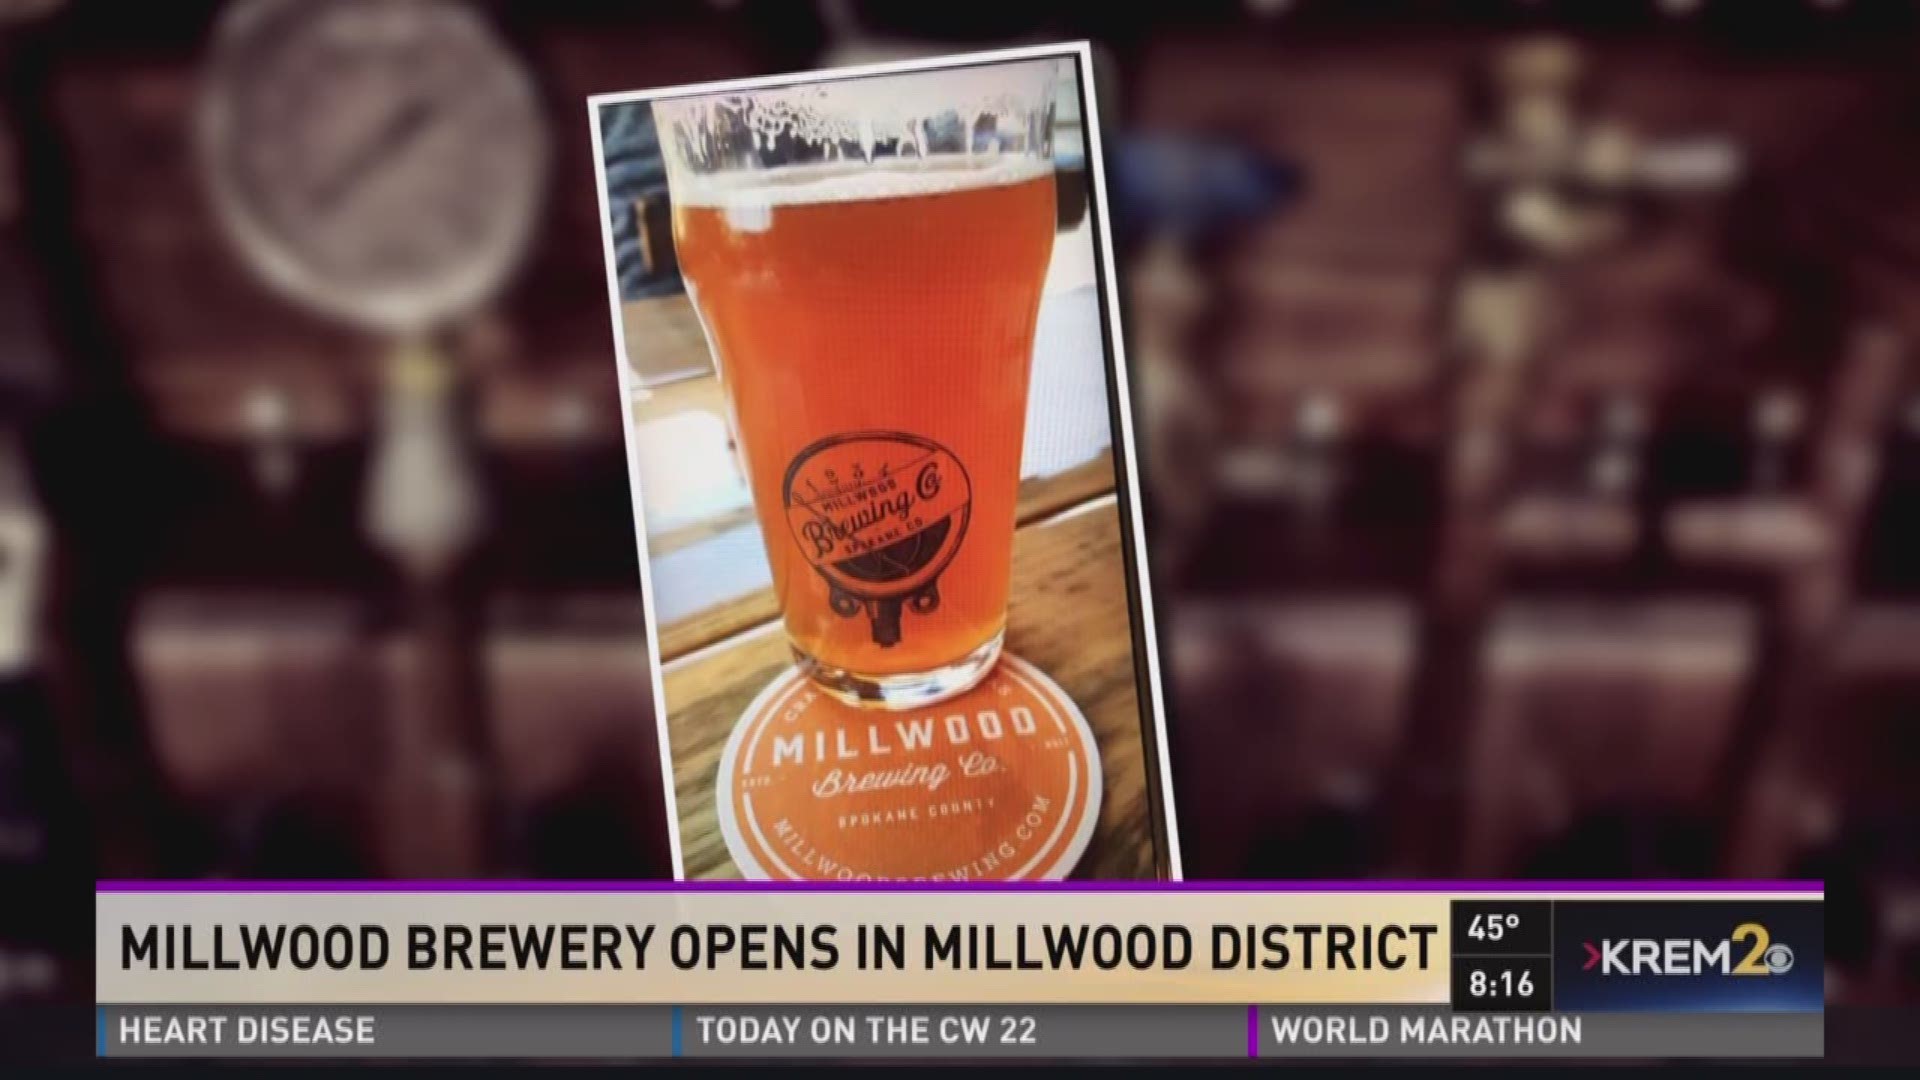 Millwood Brewery opens in Millwood District  (2-8-18)